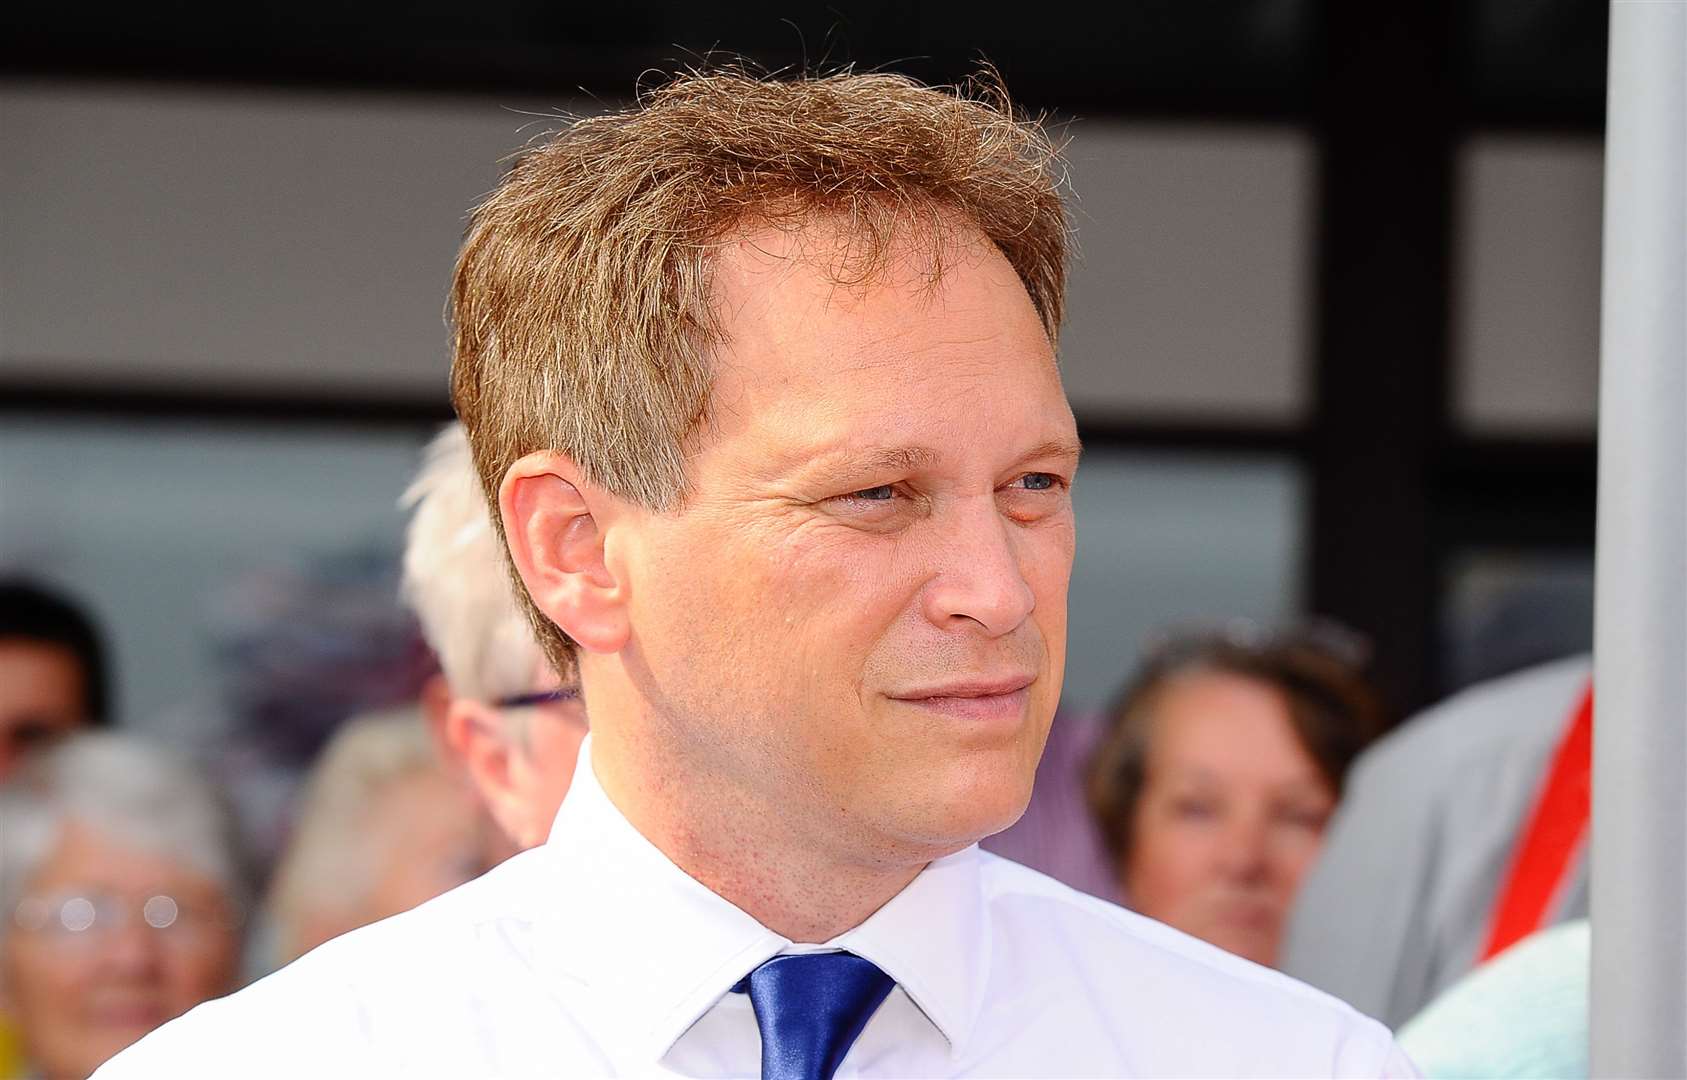 Grant Shapps says the government must "minimise the risk of disruption"